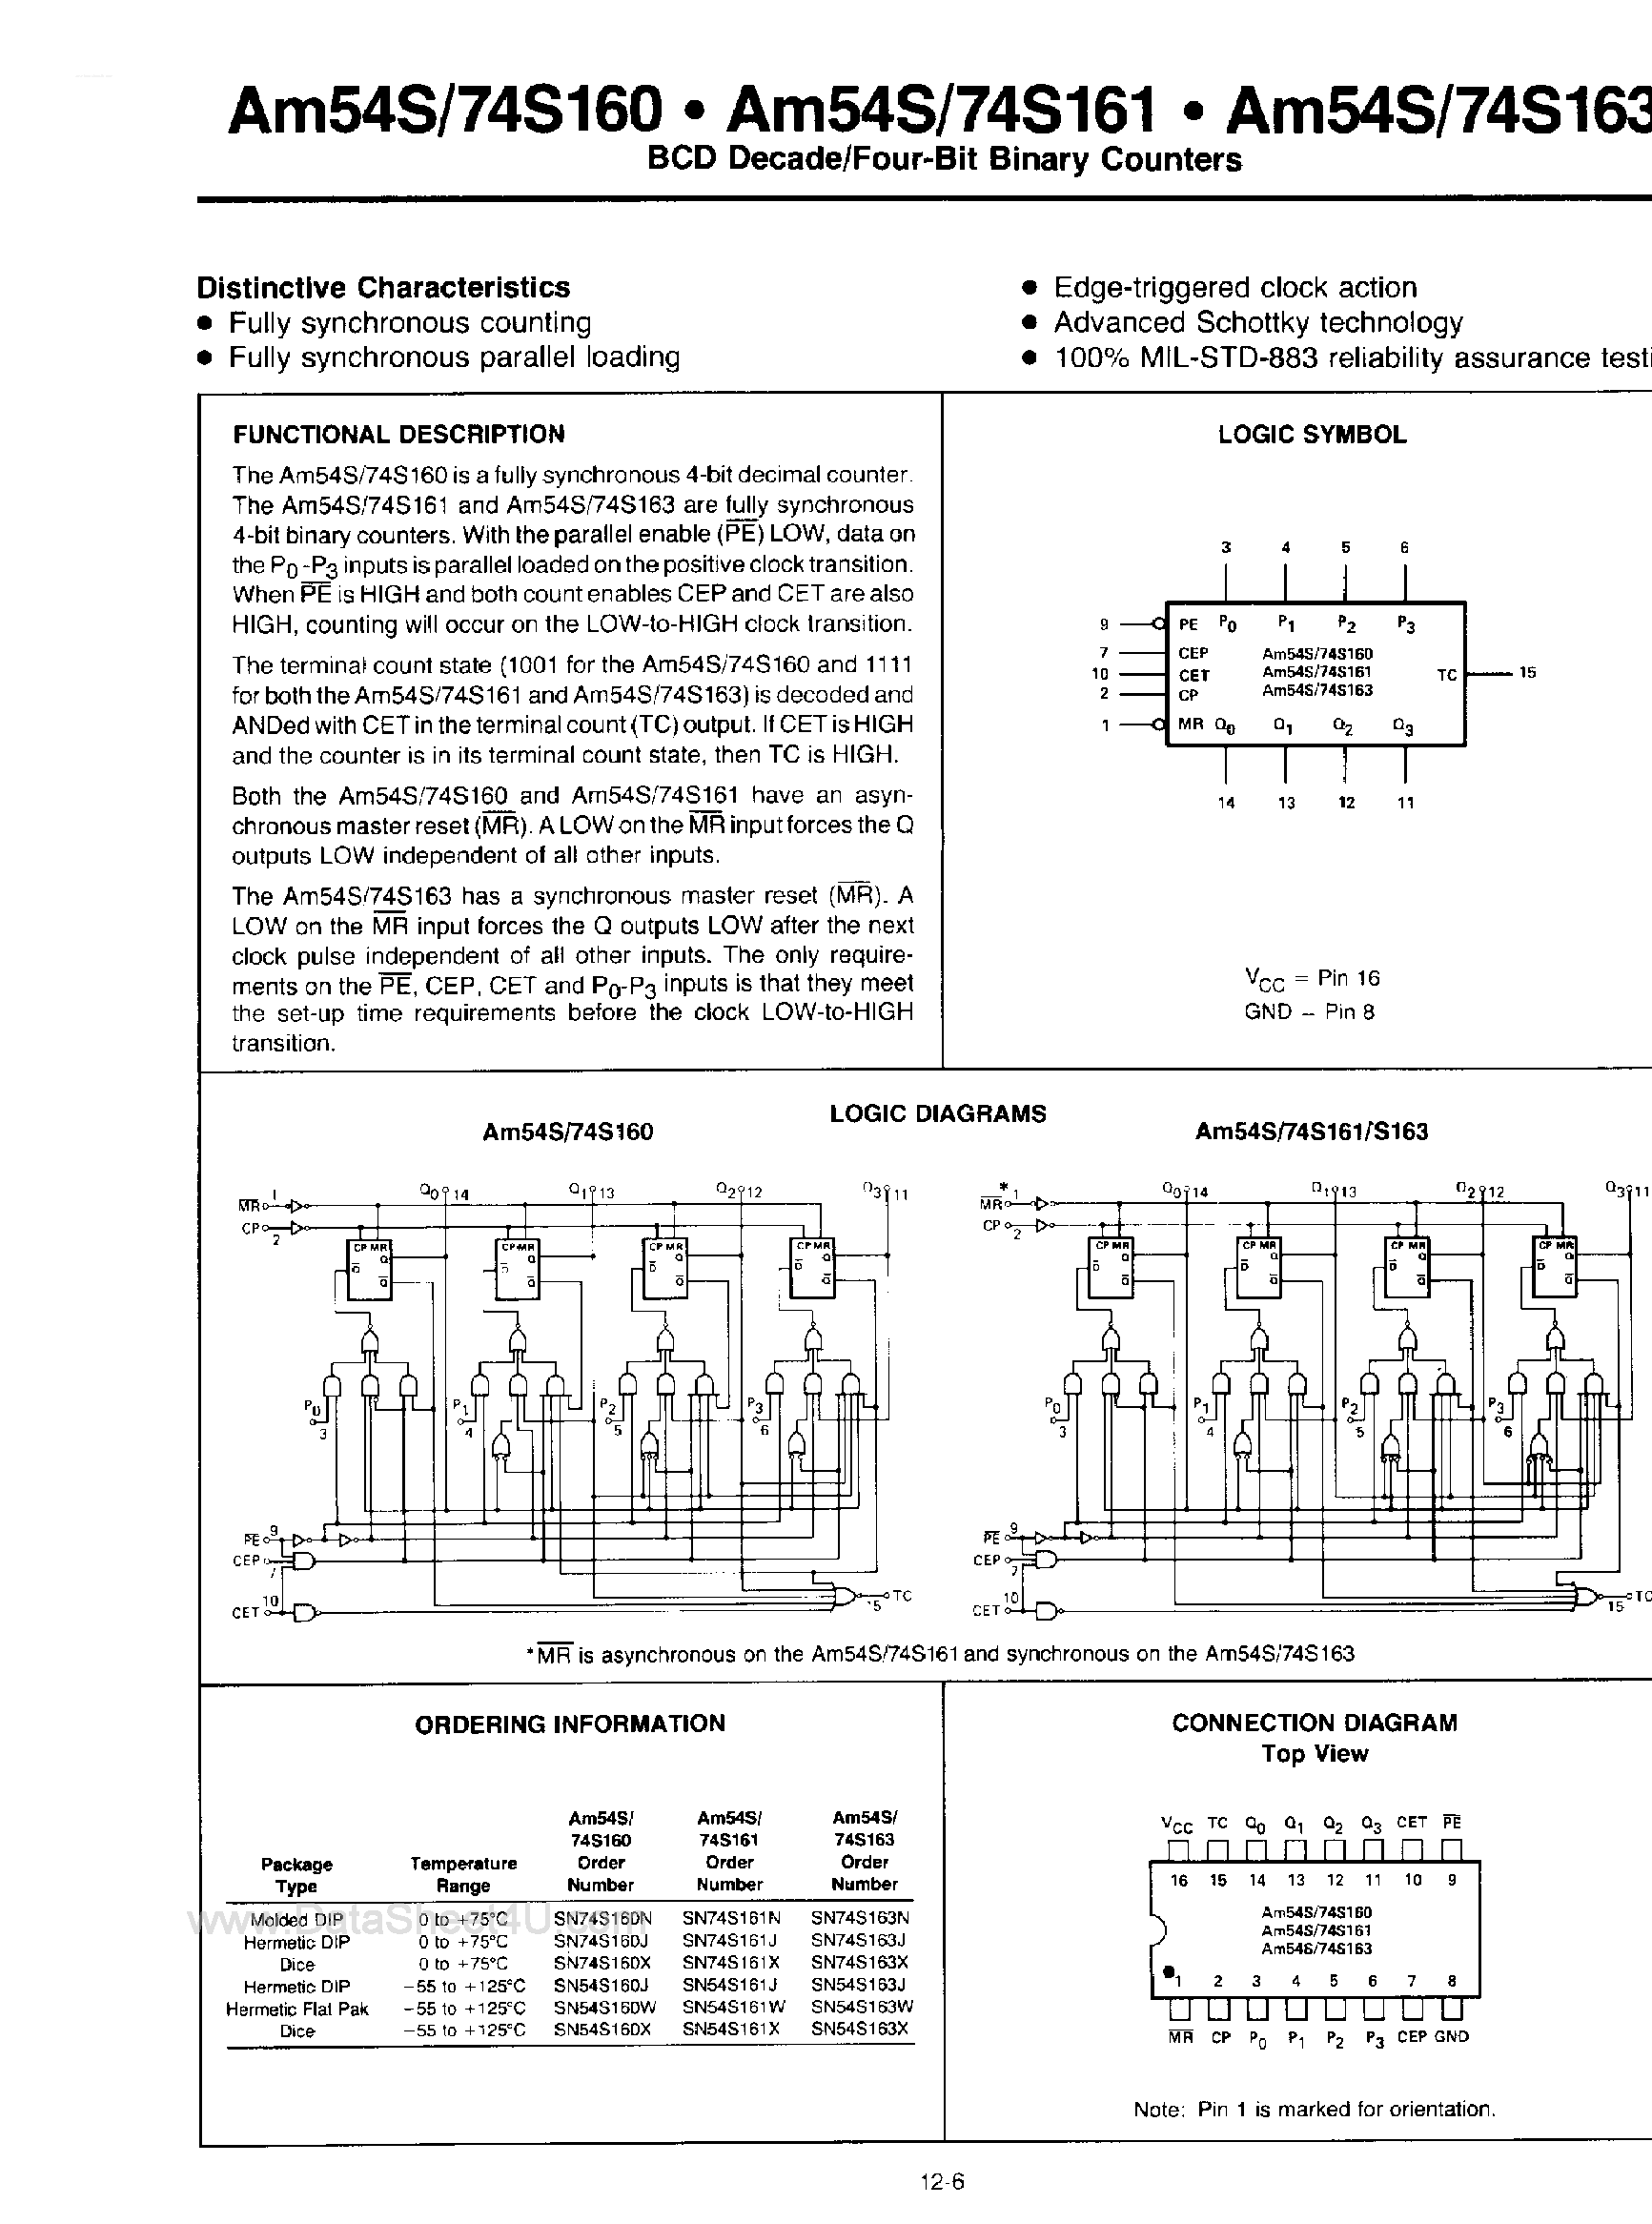 Datasheet AM54S160 - (AM54S160 - AM54S163) BCD Decade 4-Bit Binary Counters page 1